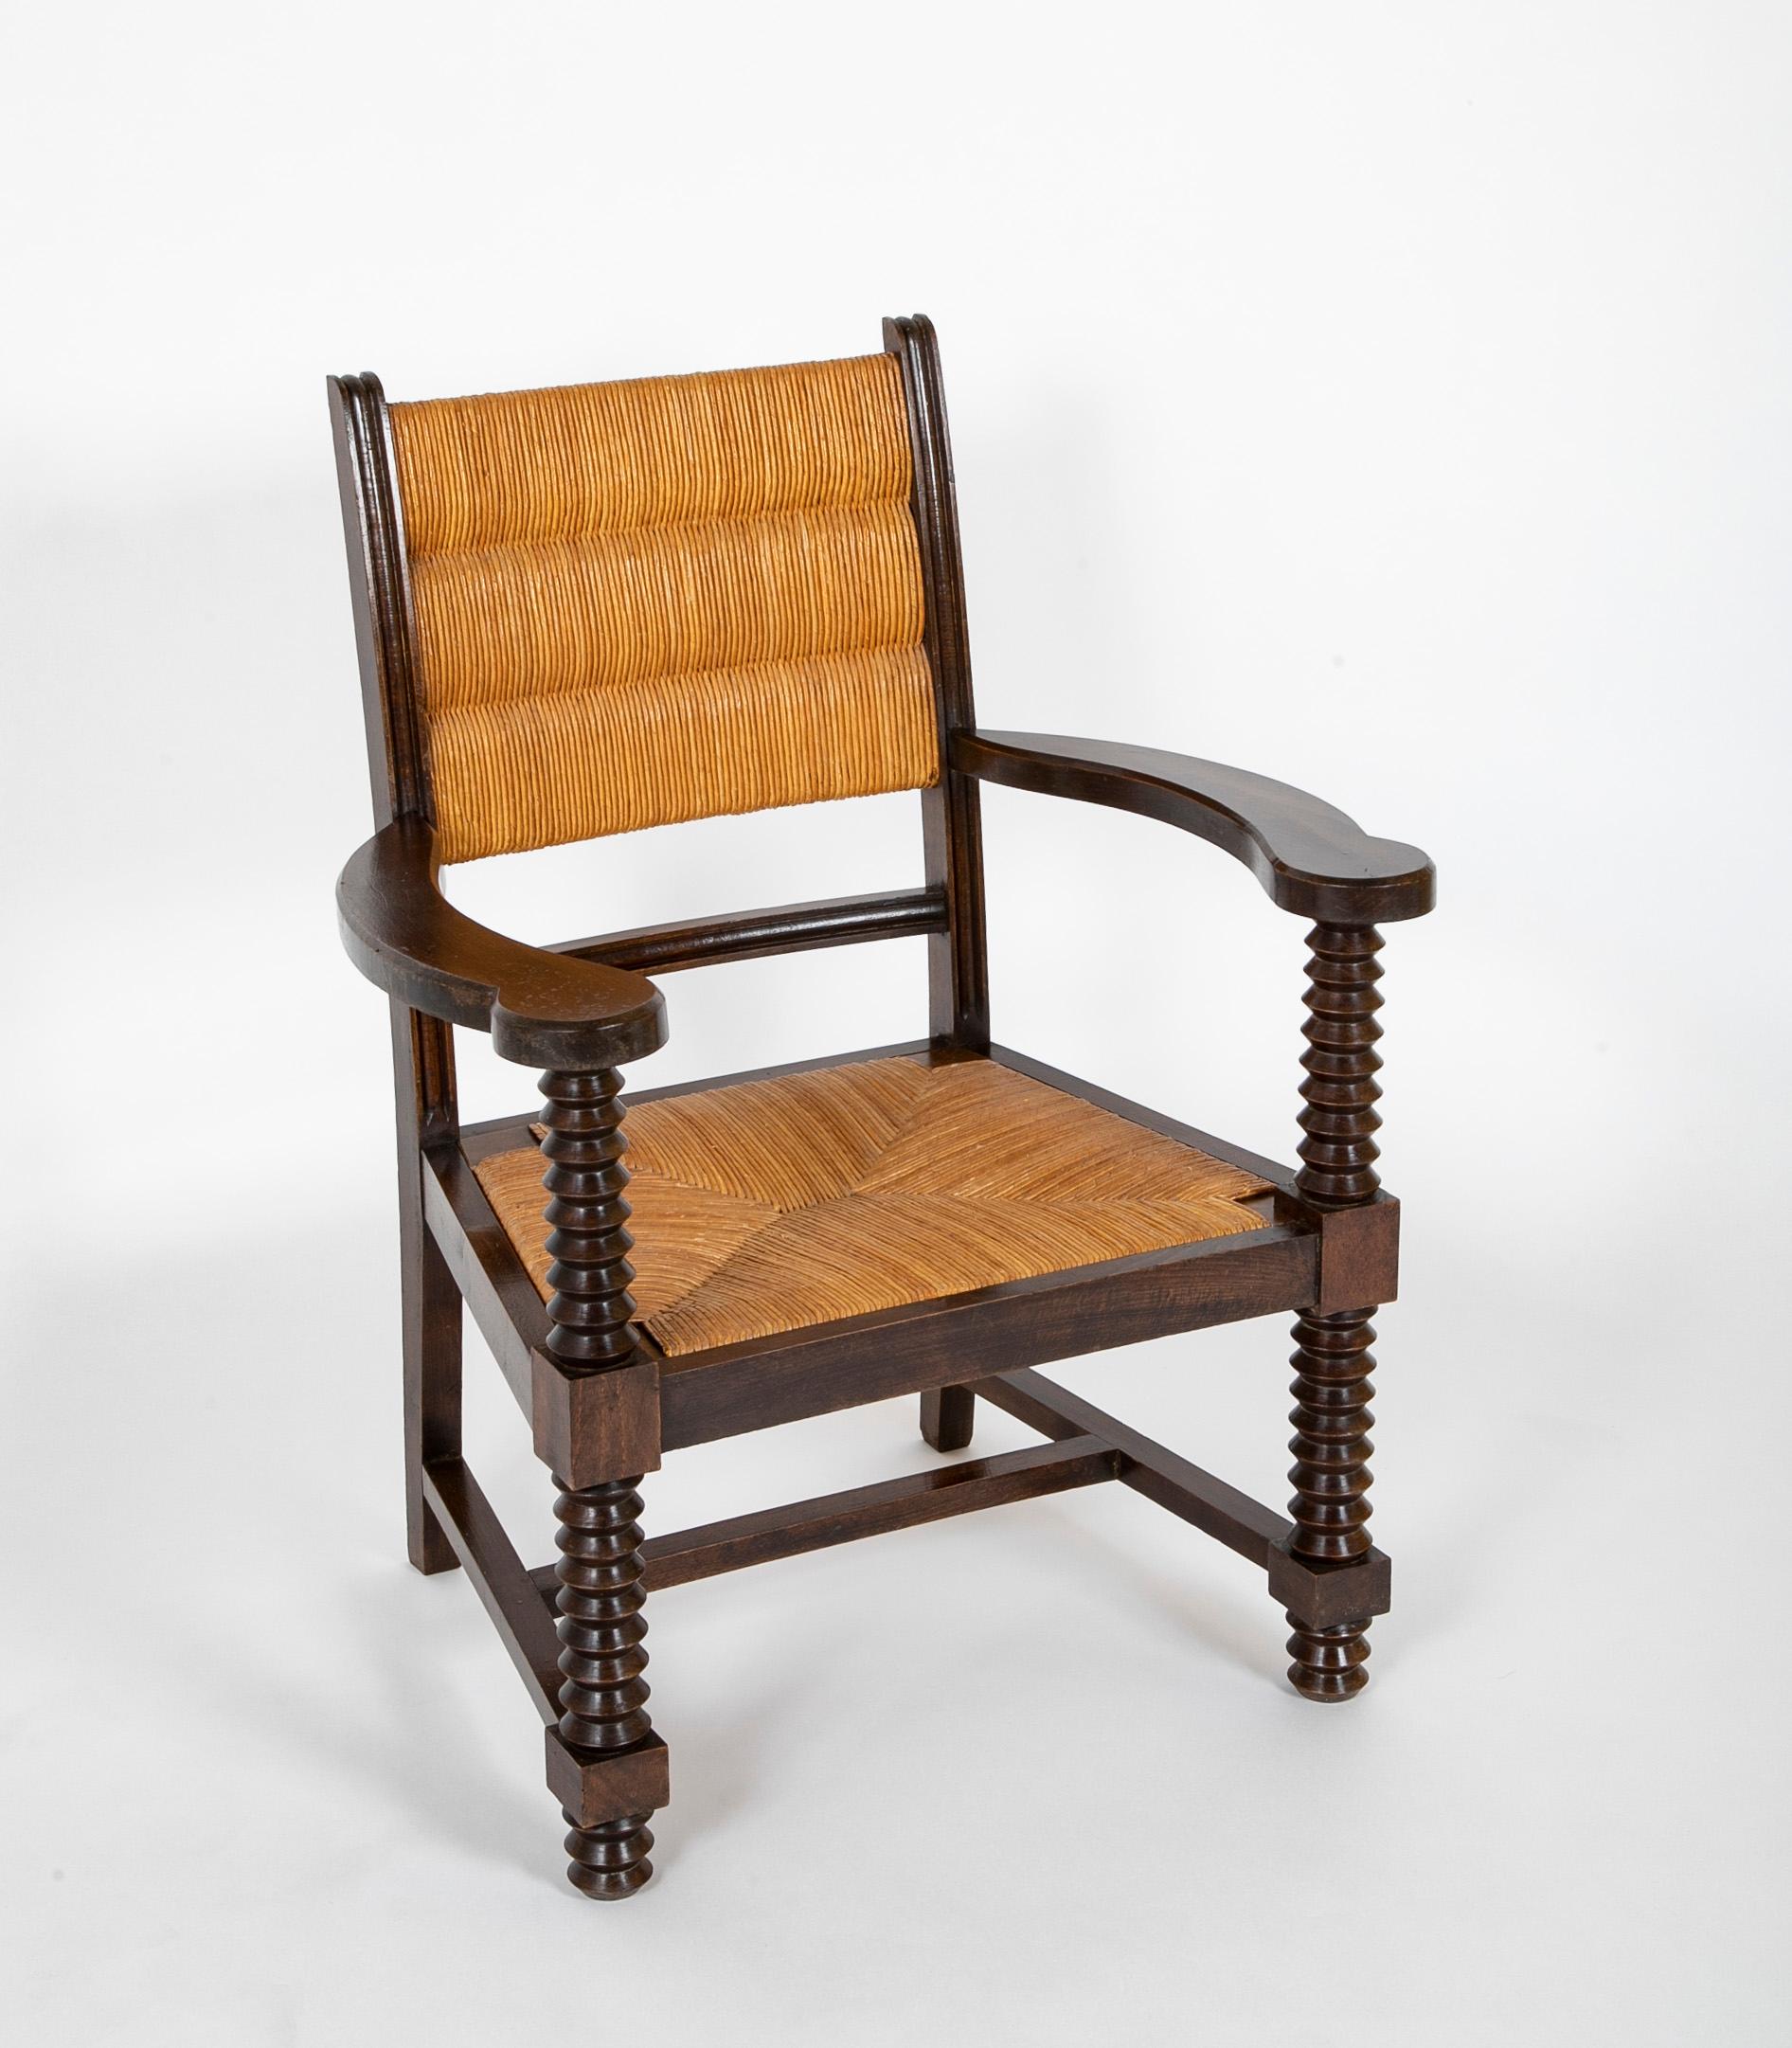 Early 20th century Charles Dudouyt ( 1885 - 1946 ) armchair with straw seat and back, spindle front legs and arms. France.